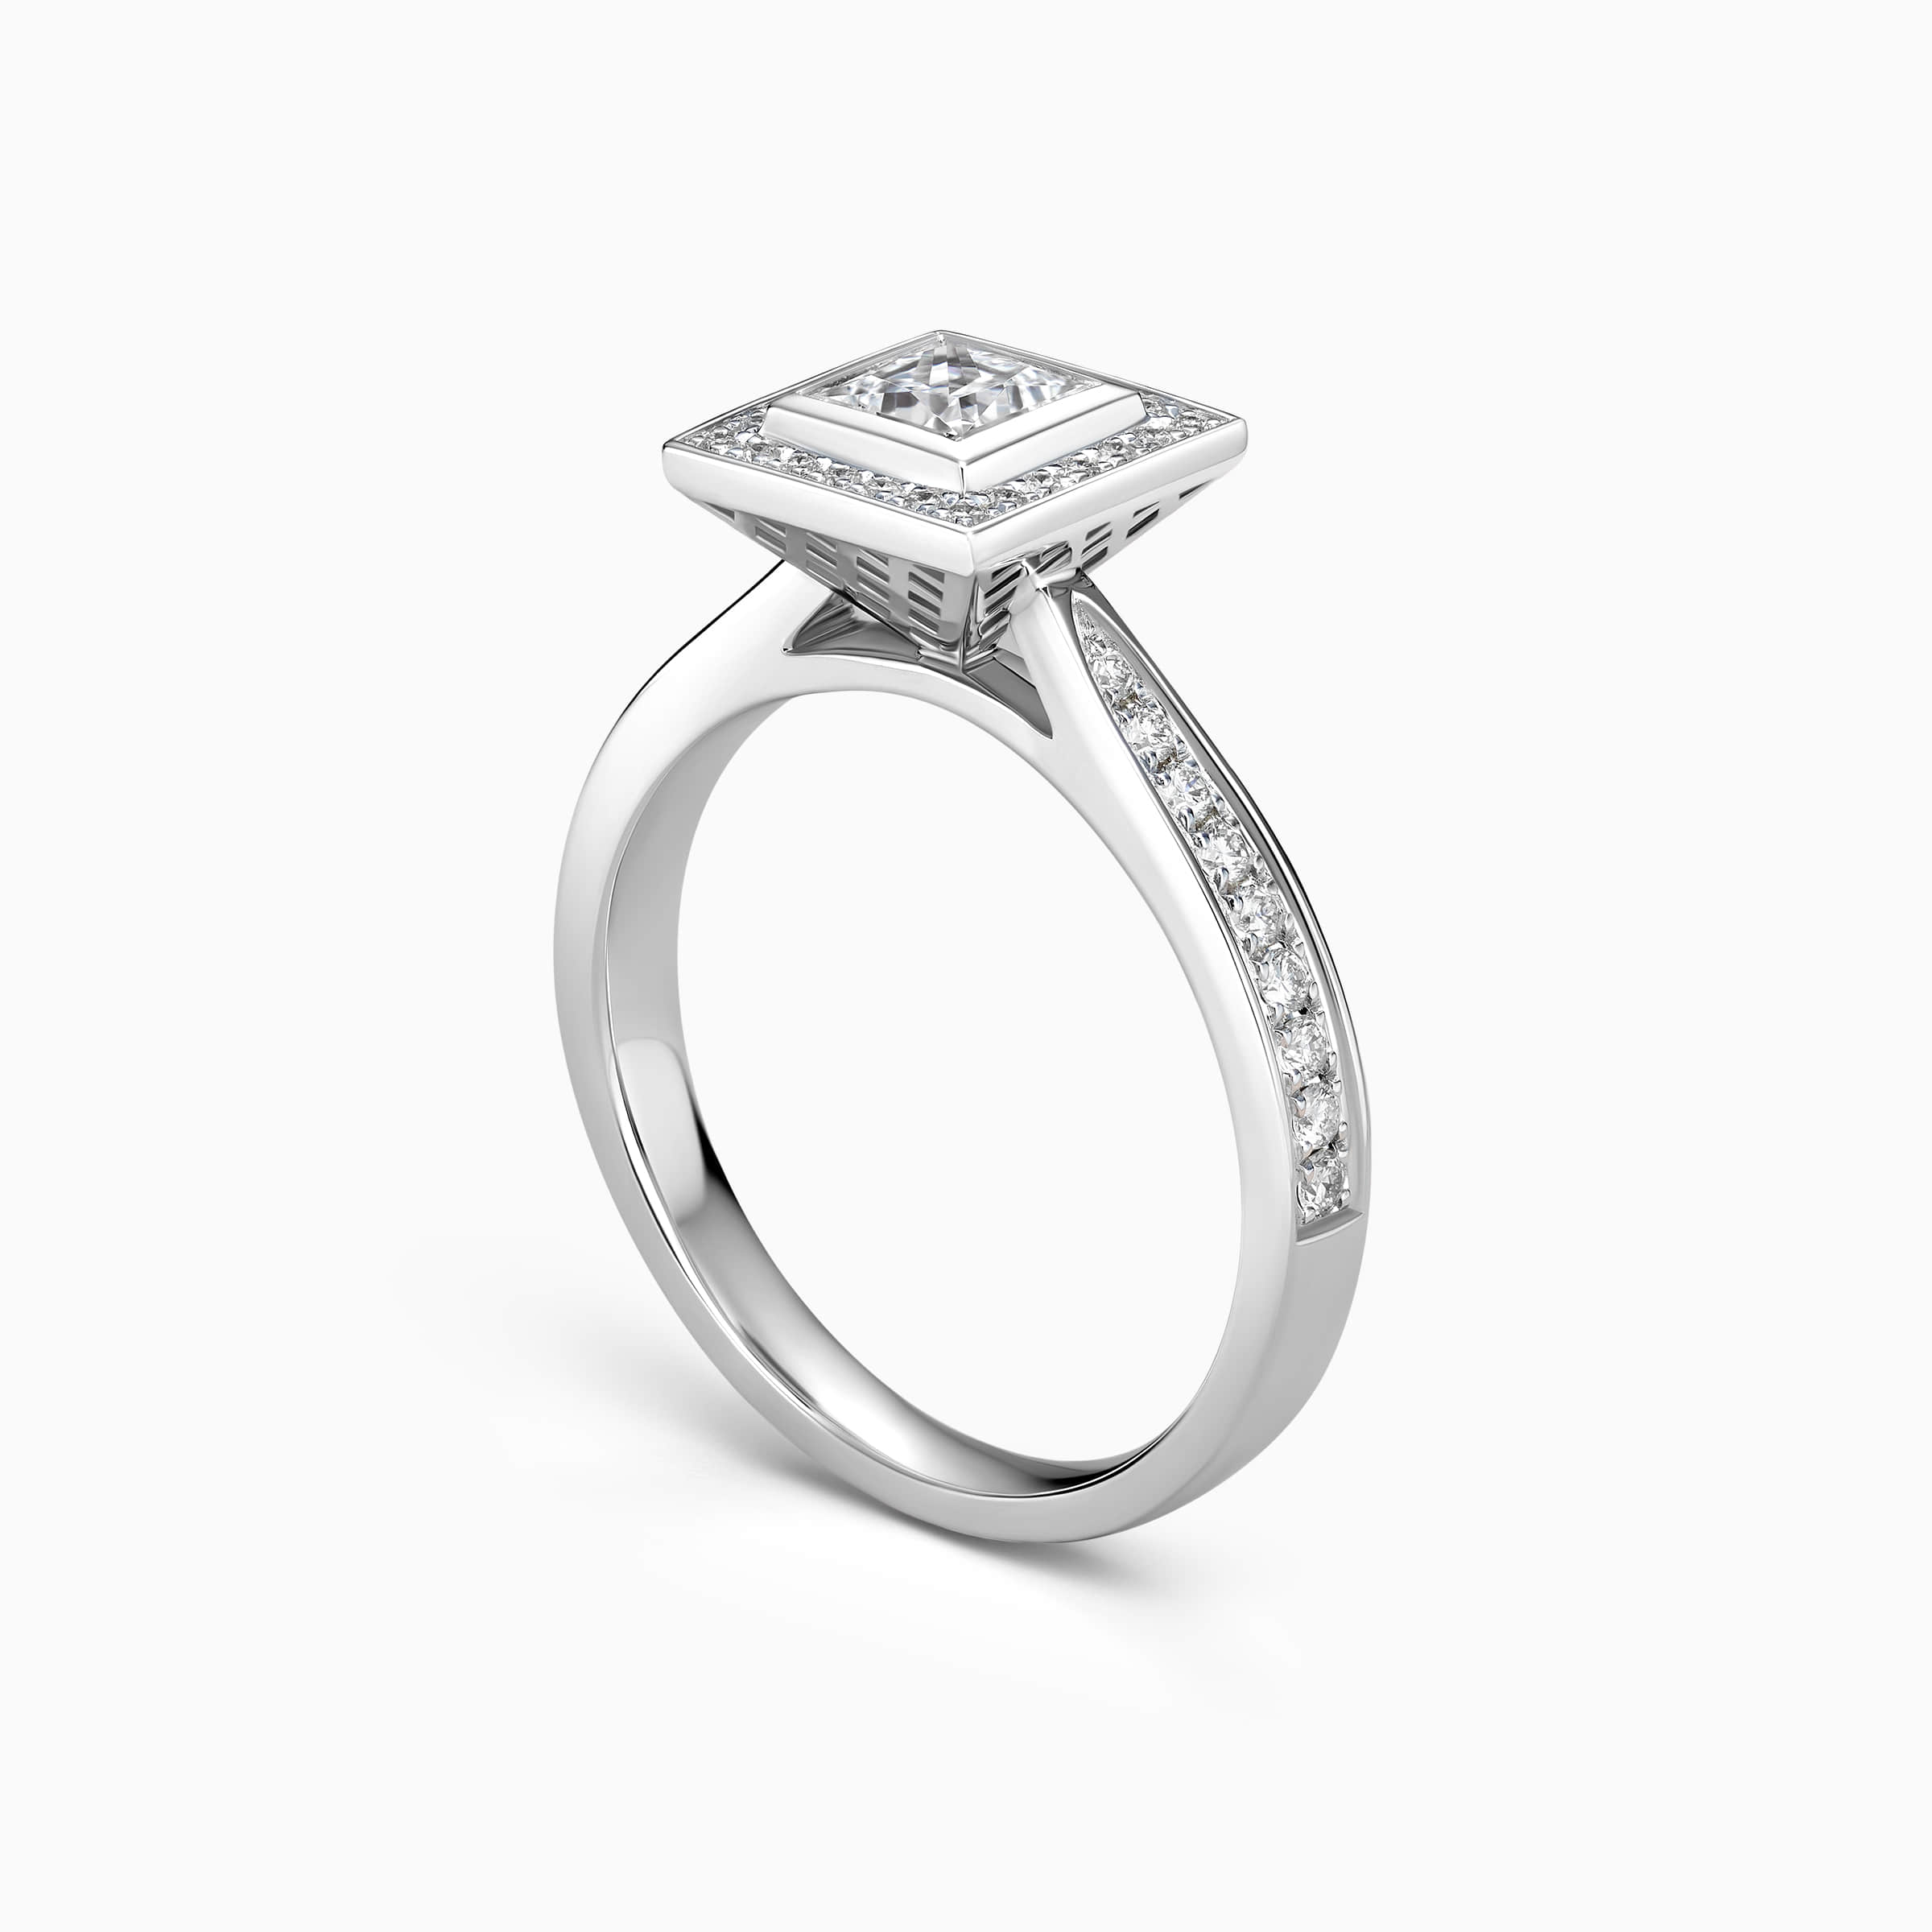 darry ring princess cut engagement ring side view